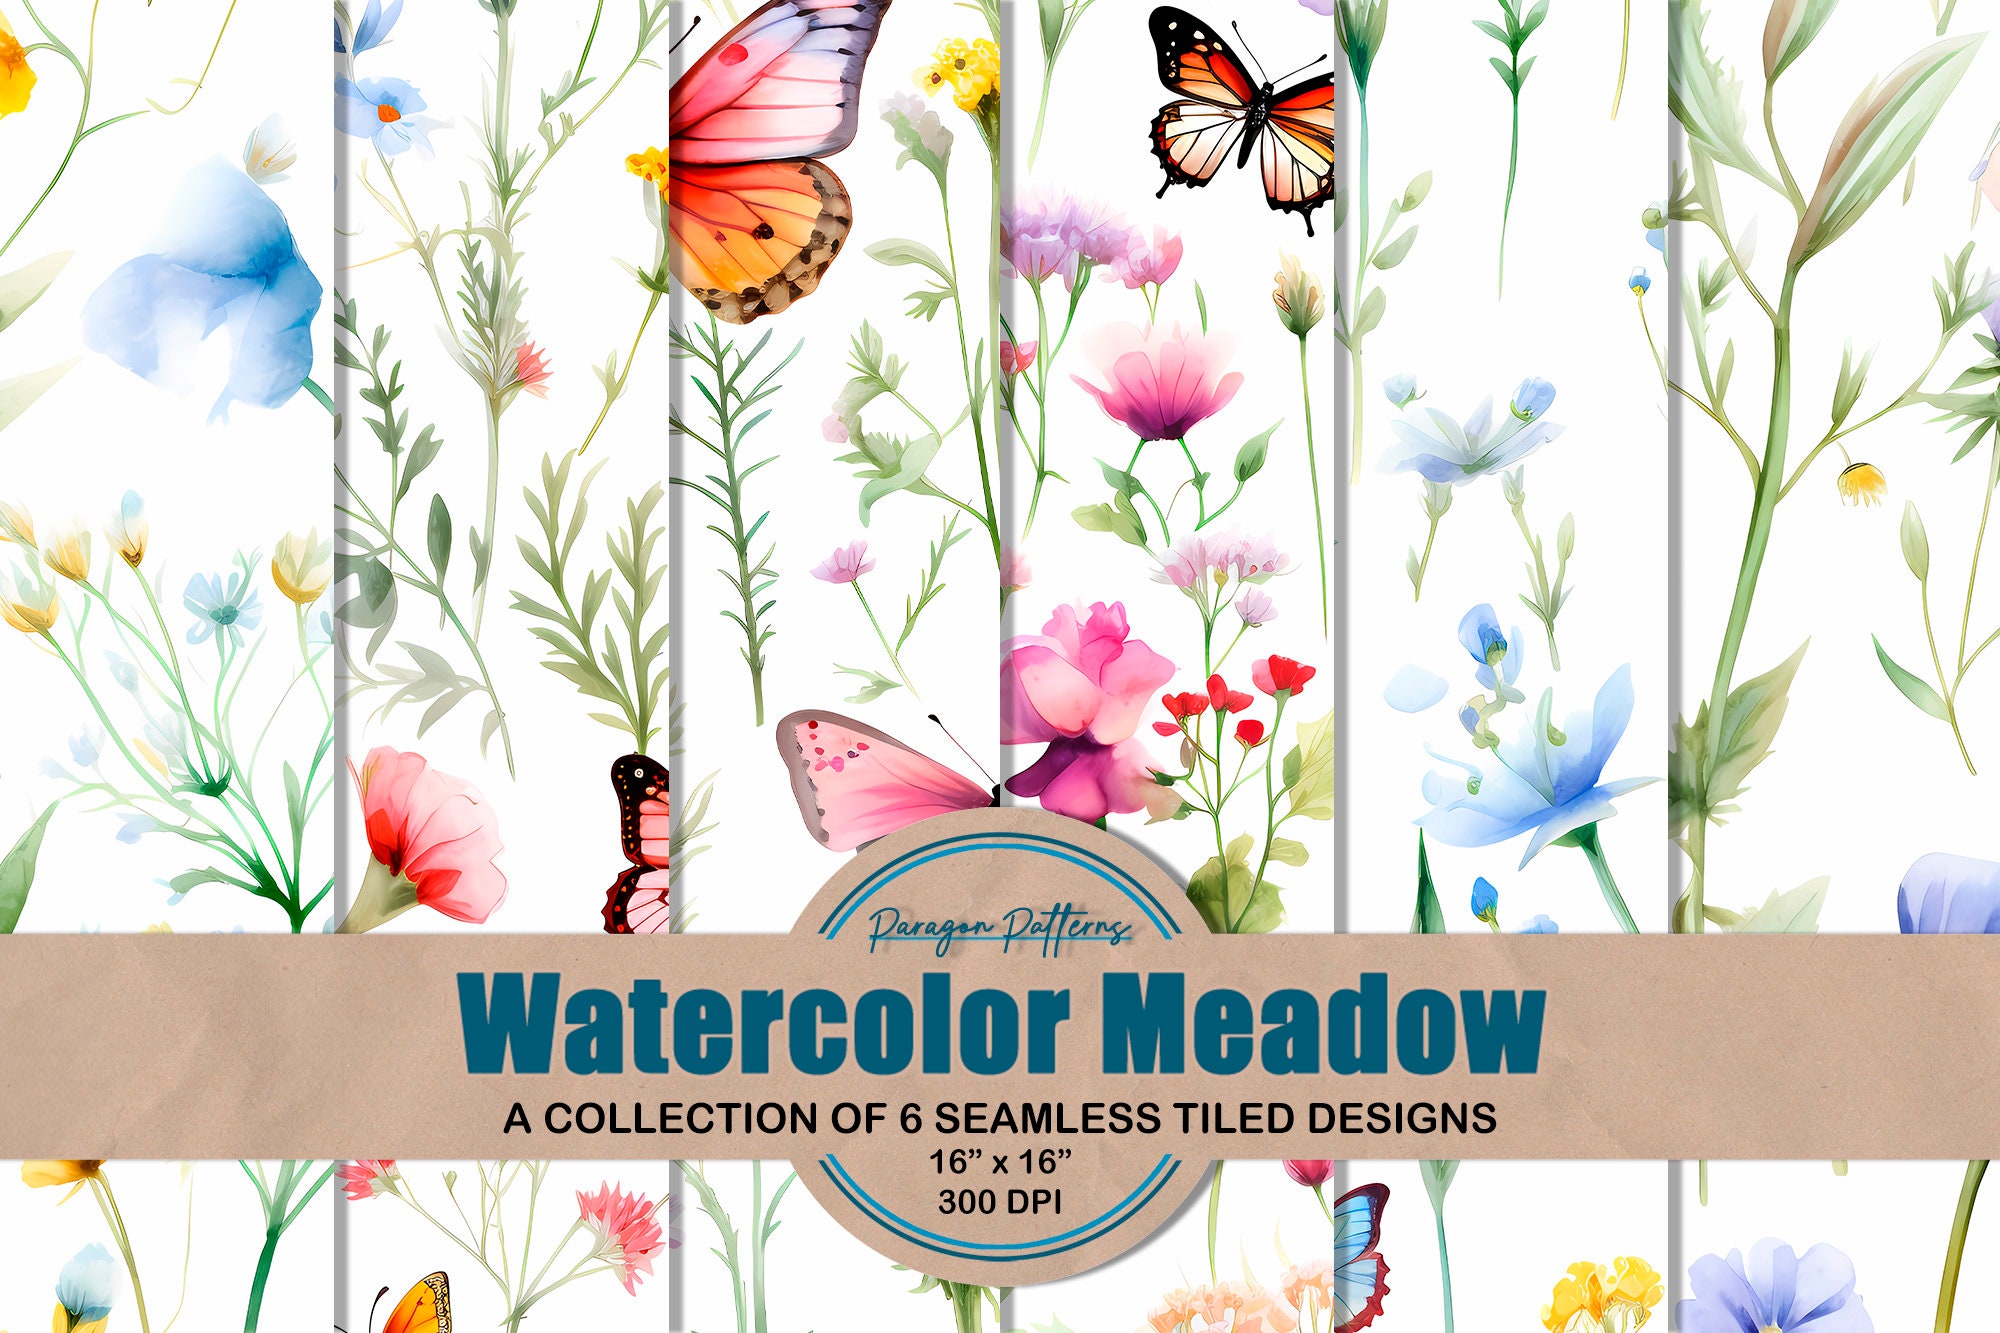 50 Personalized Custom Seed Packets - Pollinator Butterfly - Wildflower Mix